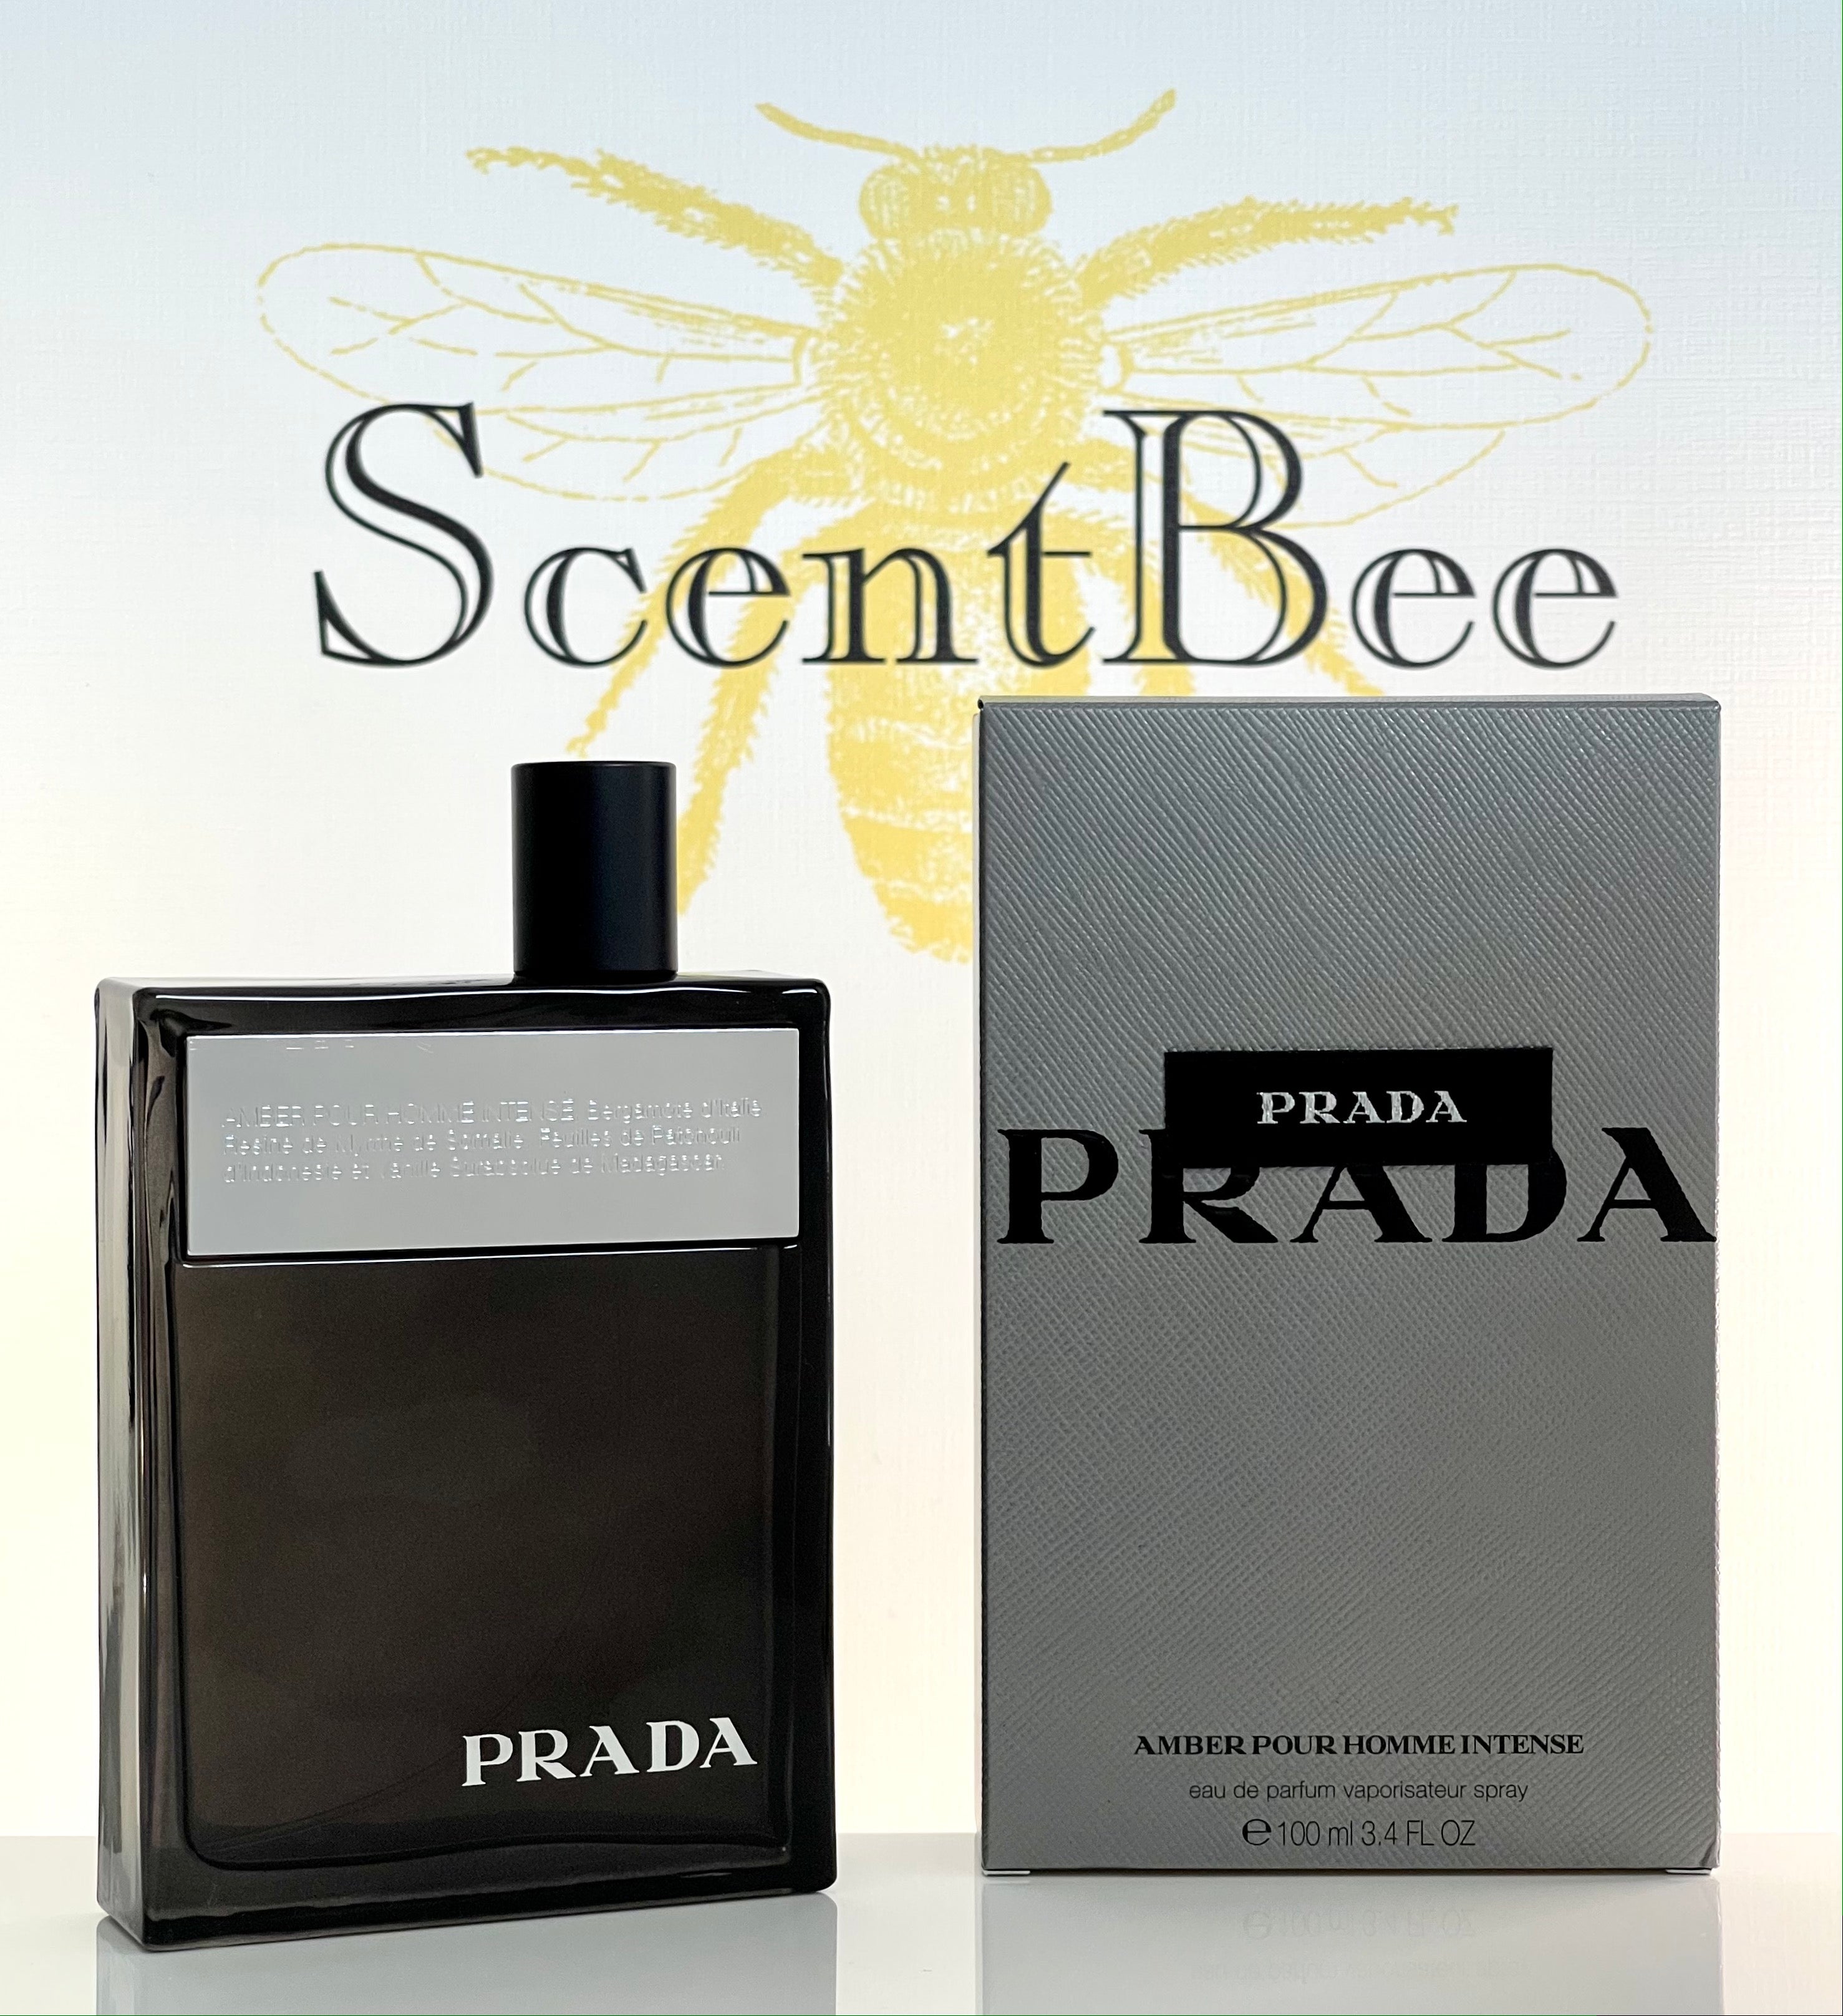 Prada Amber Pour Homme Intense Prada for Men and Masculine - Scentbee USA